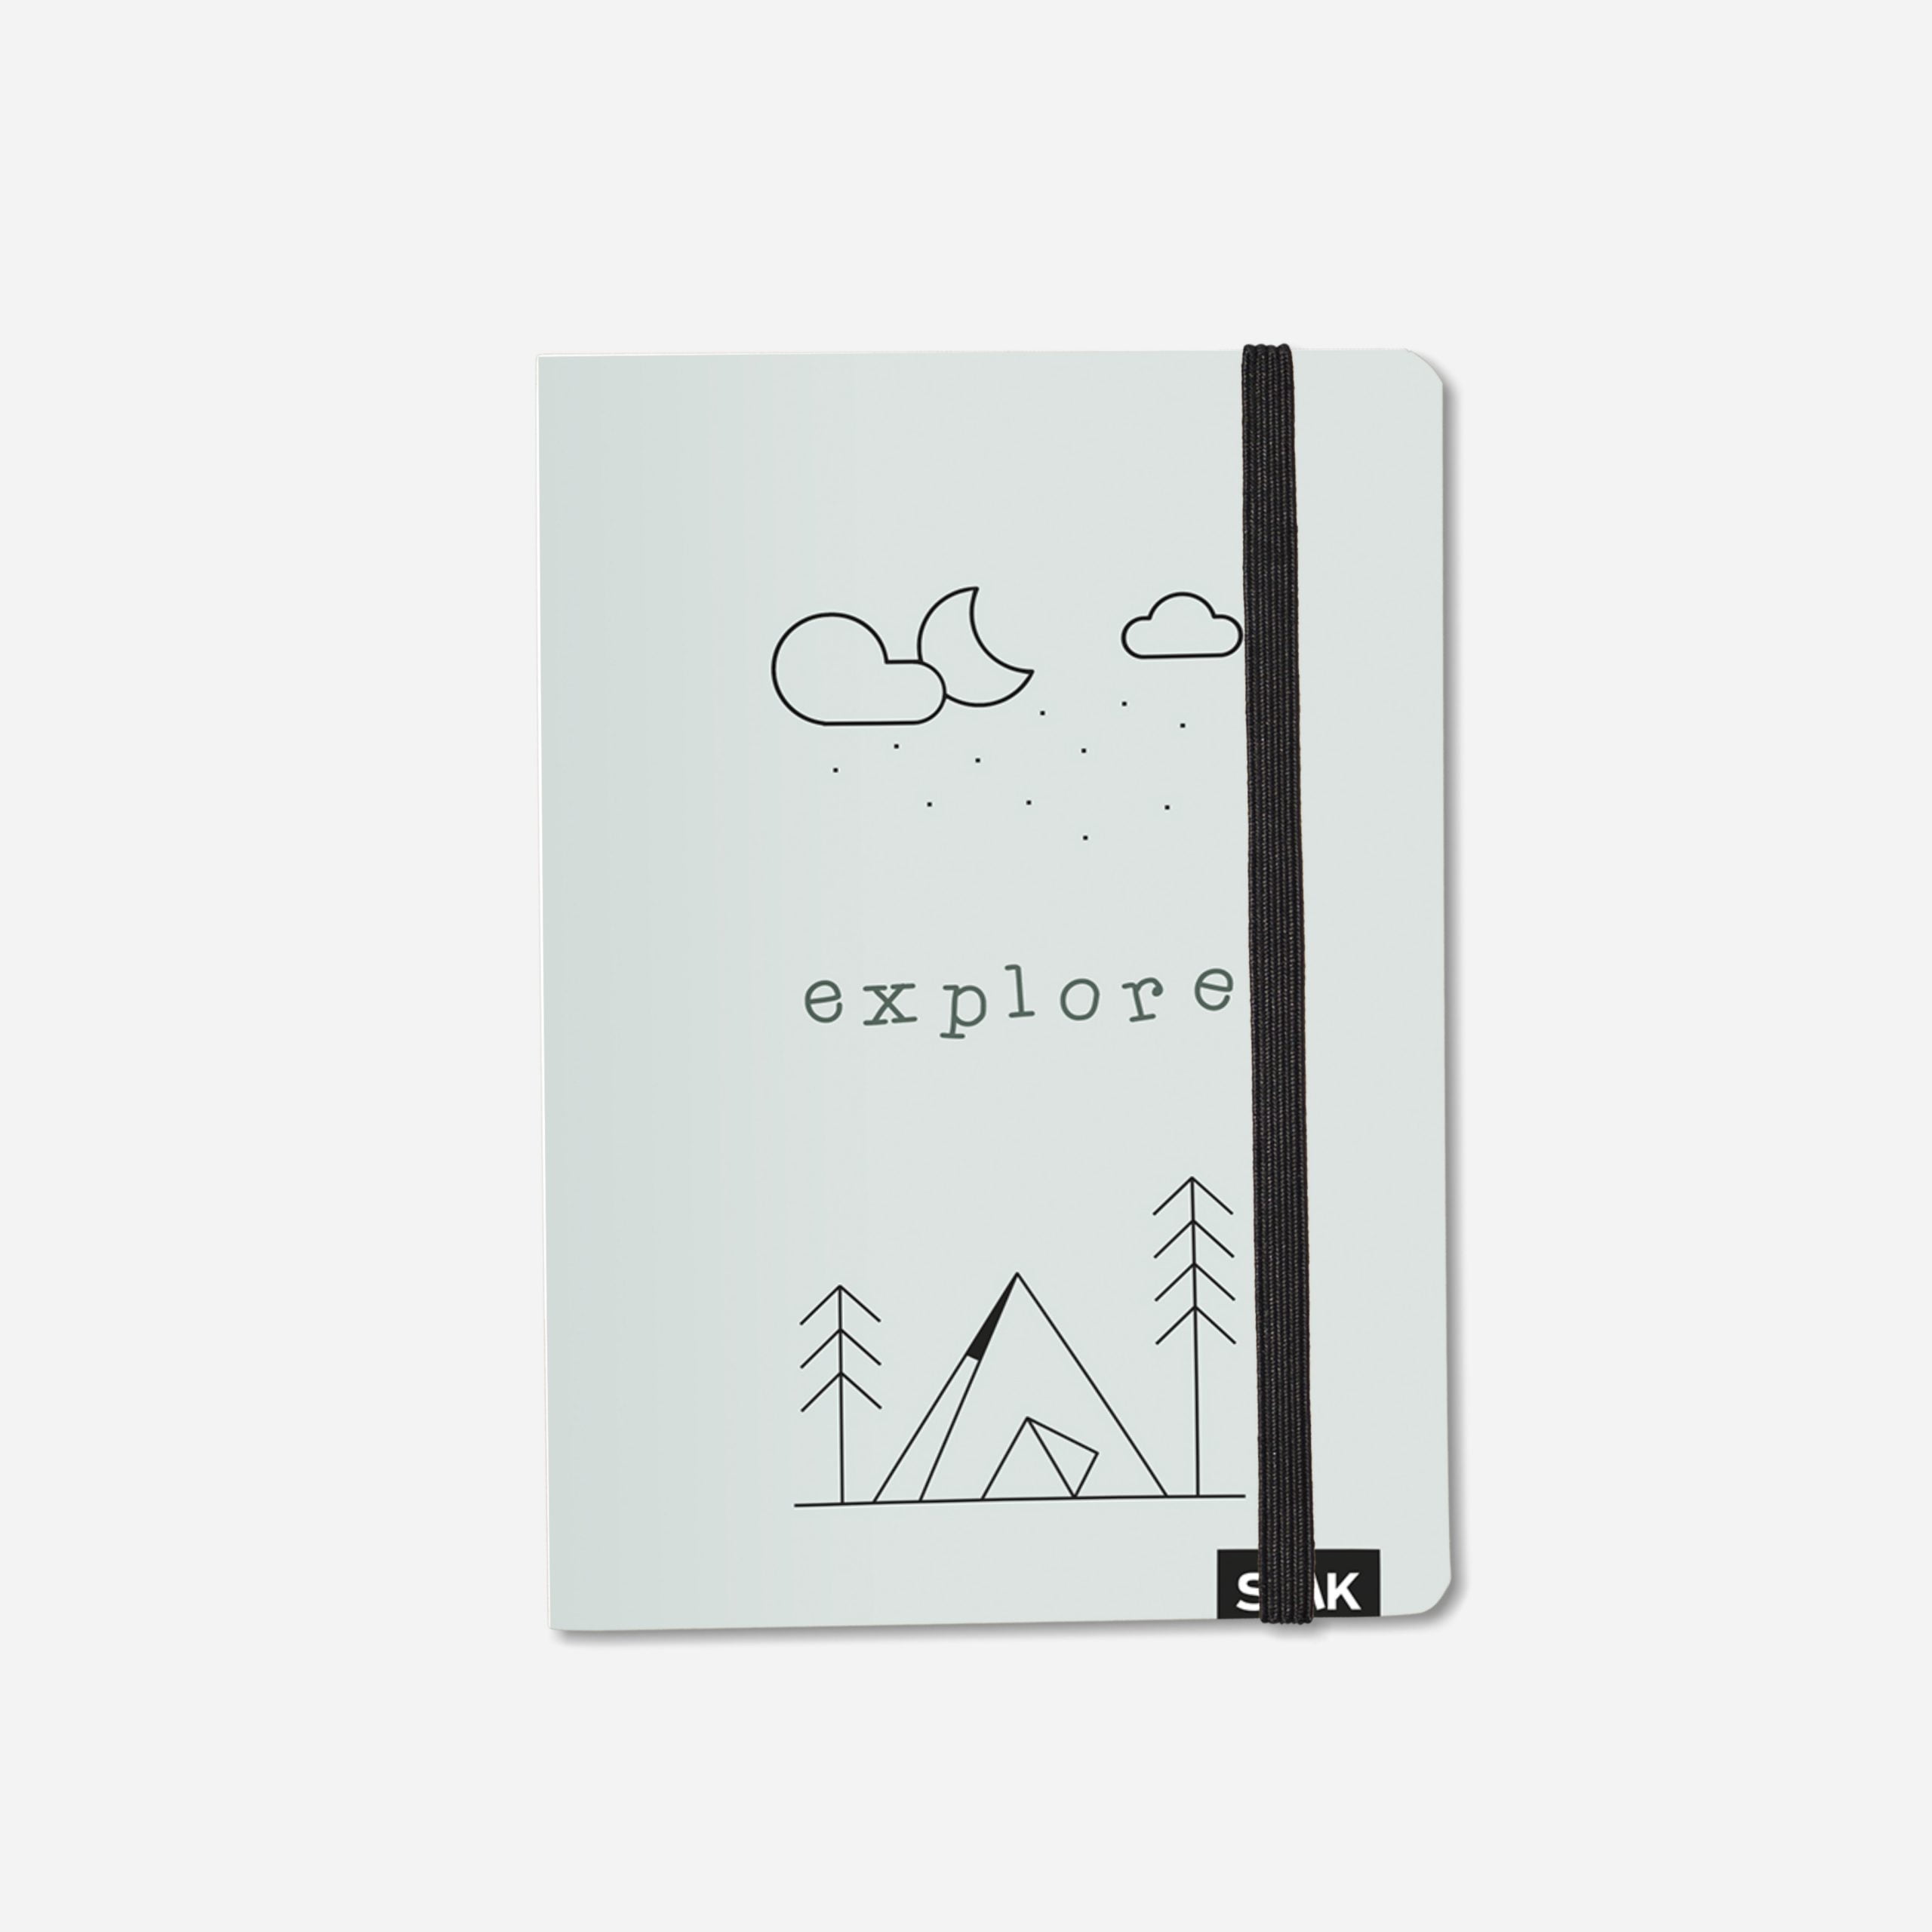 SEIK BULLET JOURNAL Start with a blank page & Explore